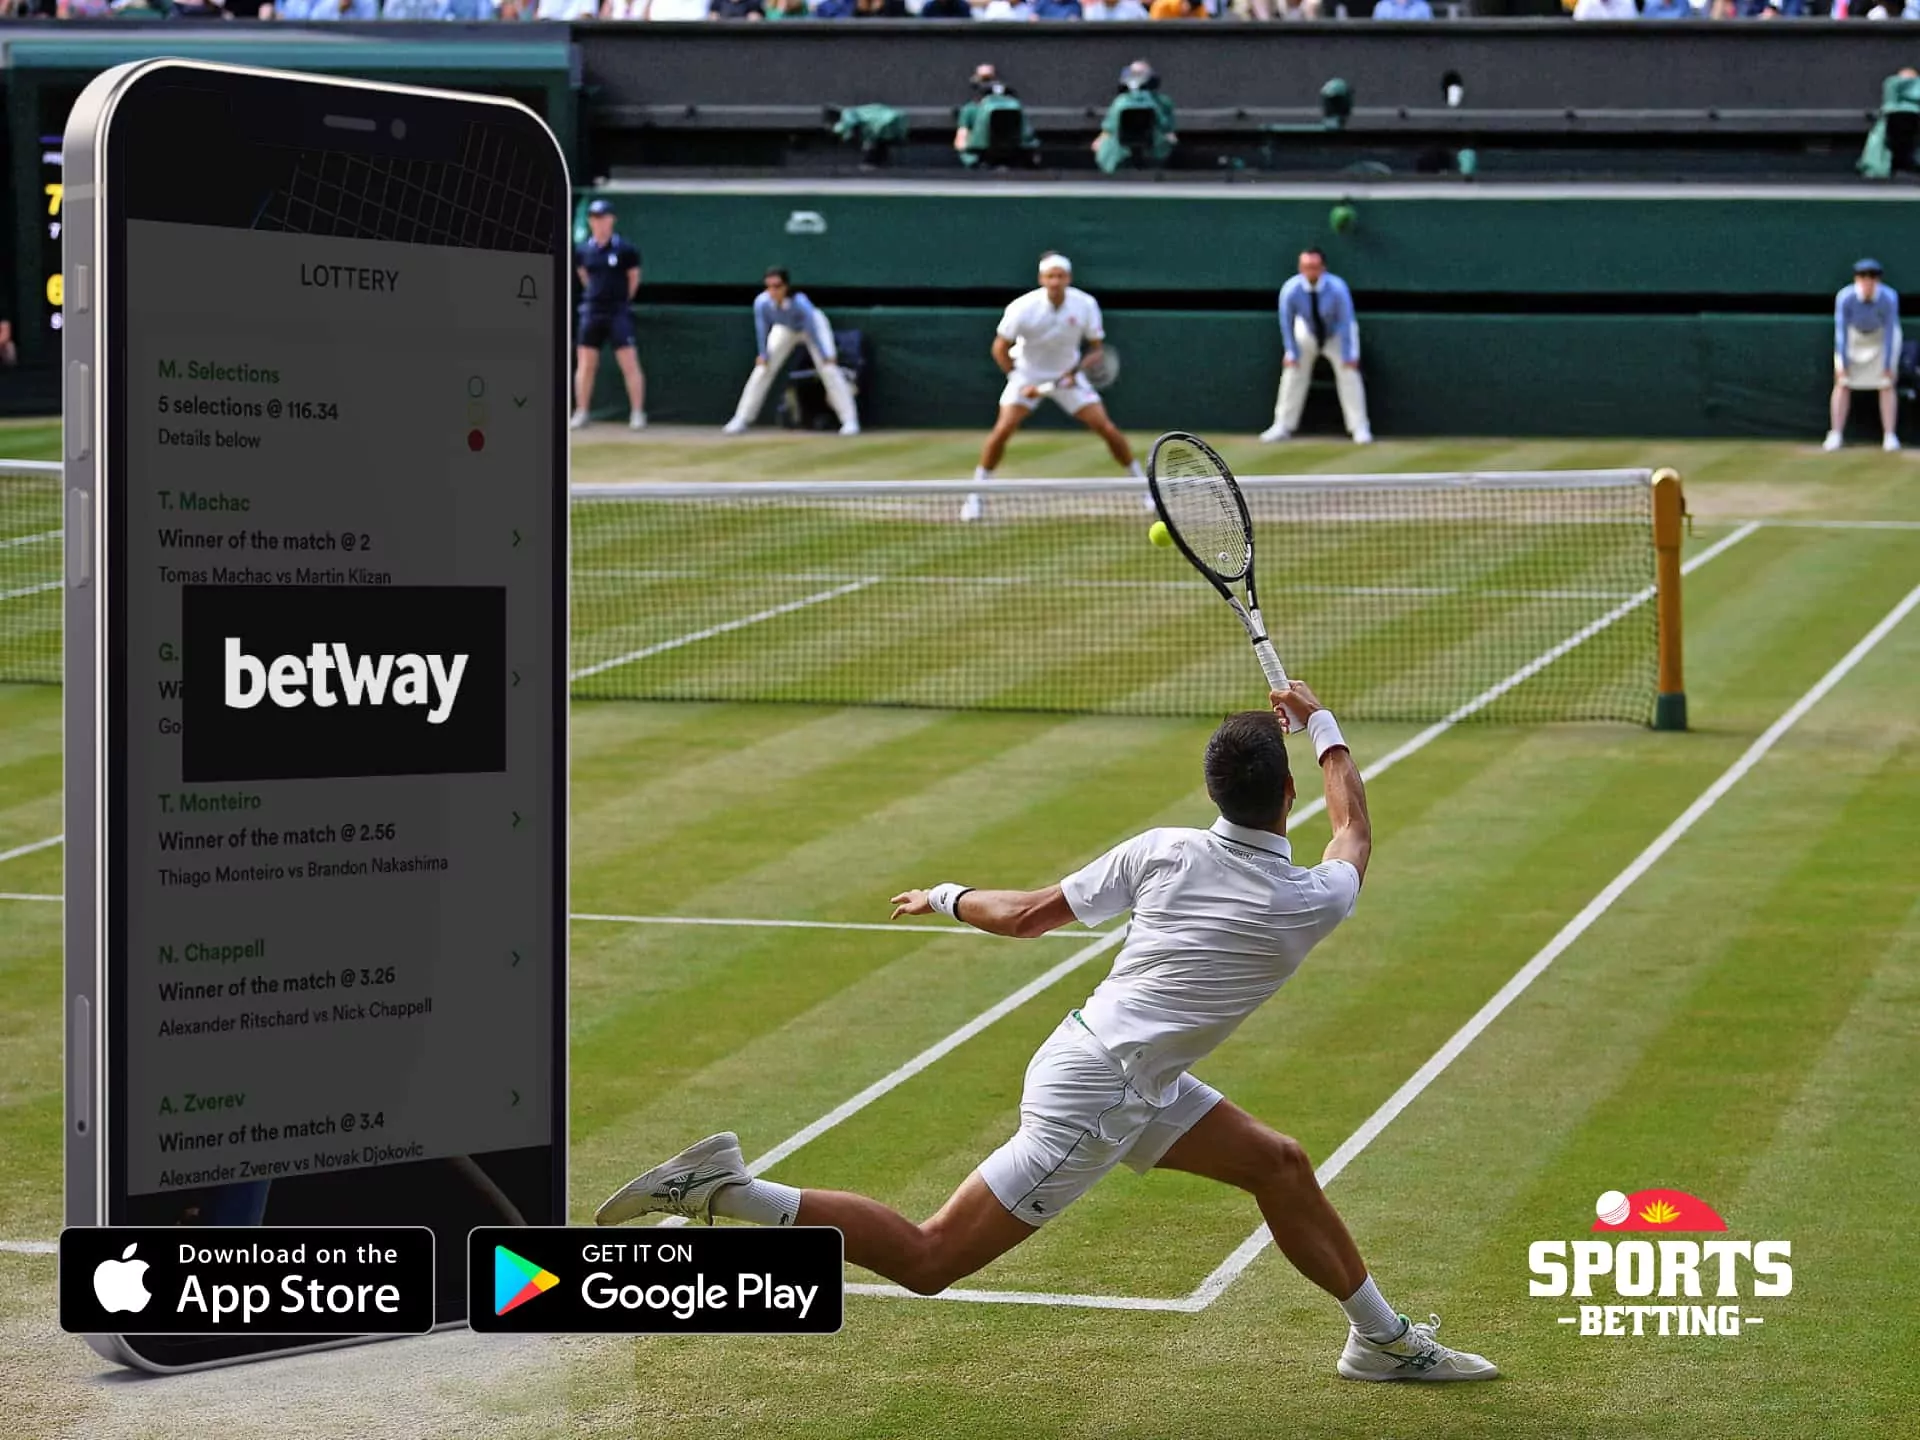 BetWay tennis betting site with a free betting club.